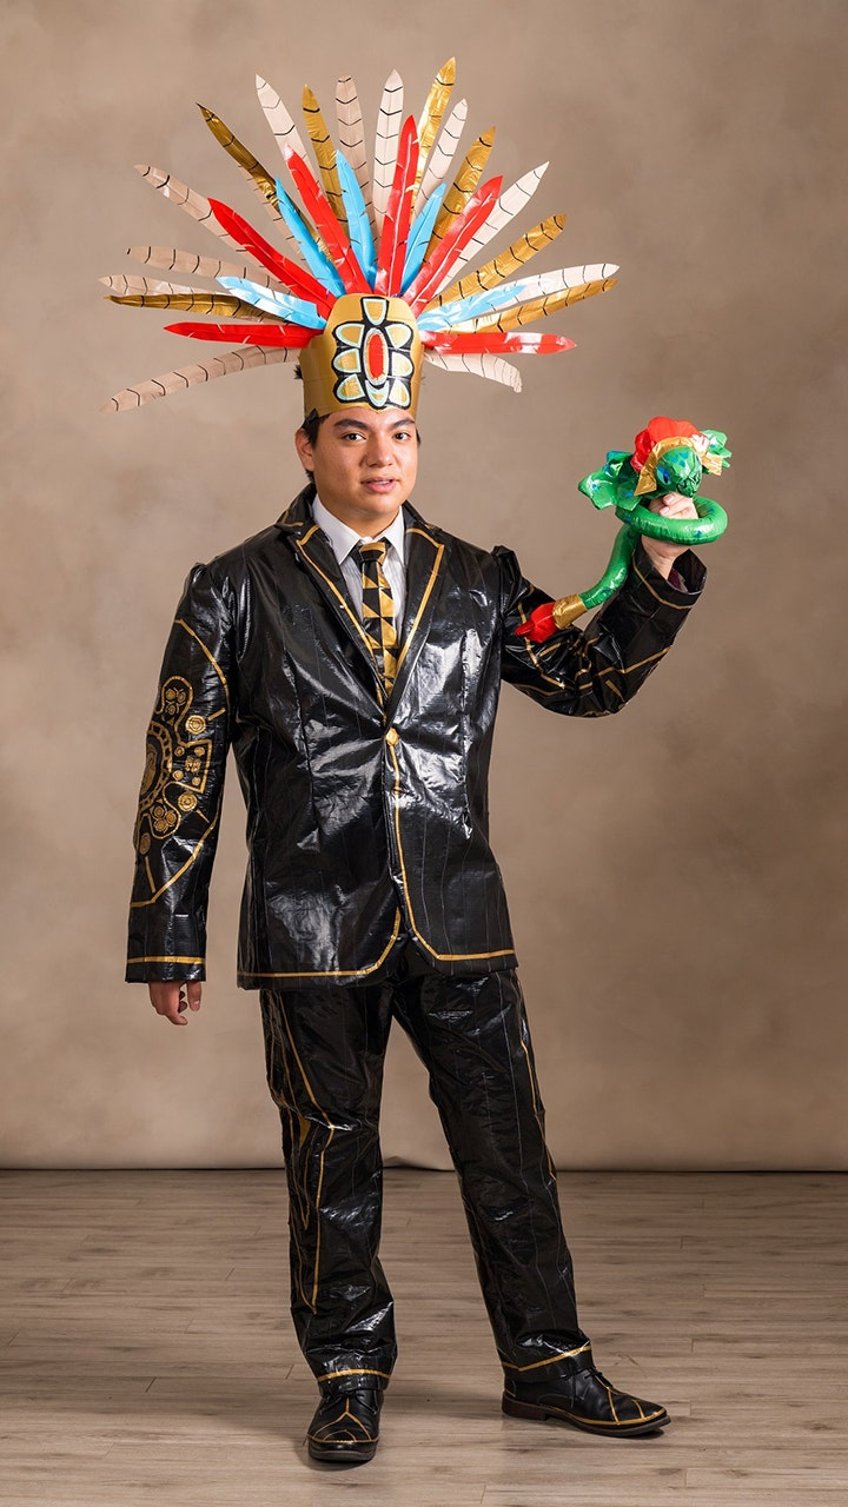 teens make prom dress and tux out of duct tape win 10k in scholarship prize money